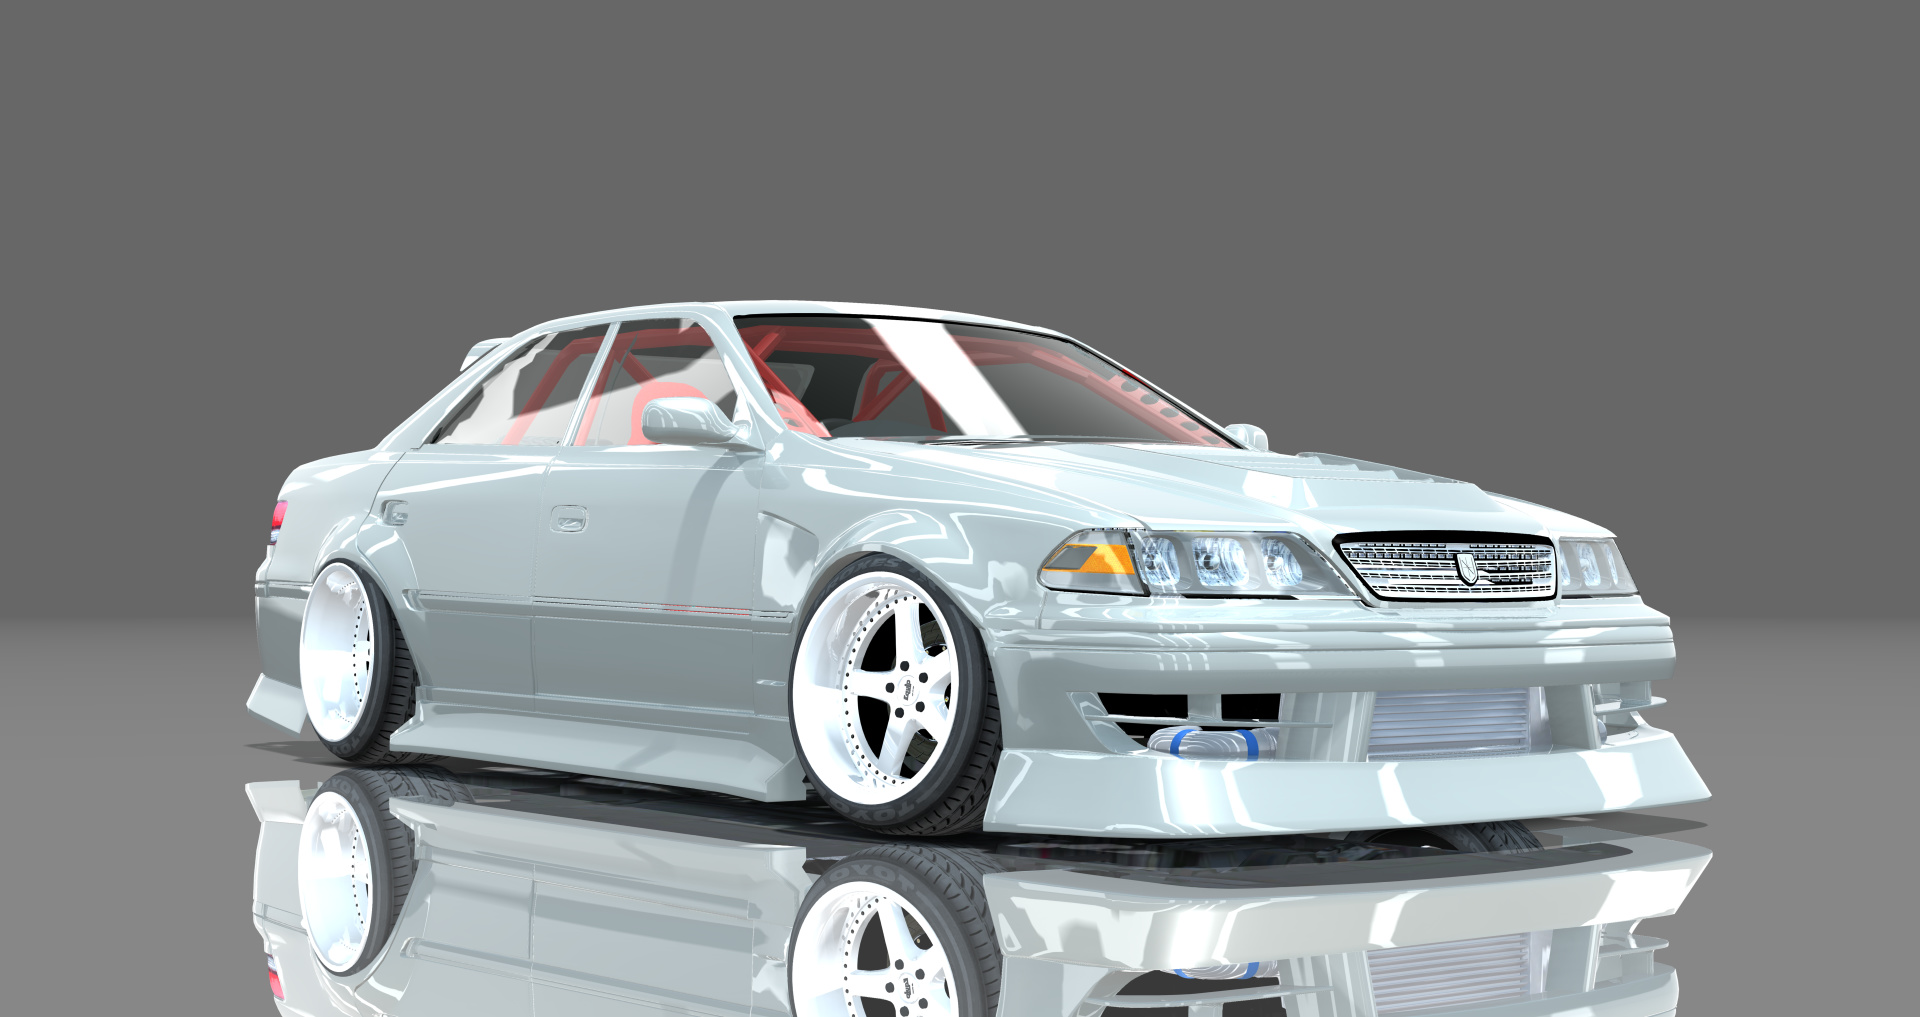 DTP Toyota JZX100 Mark2, skin silver